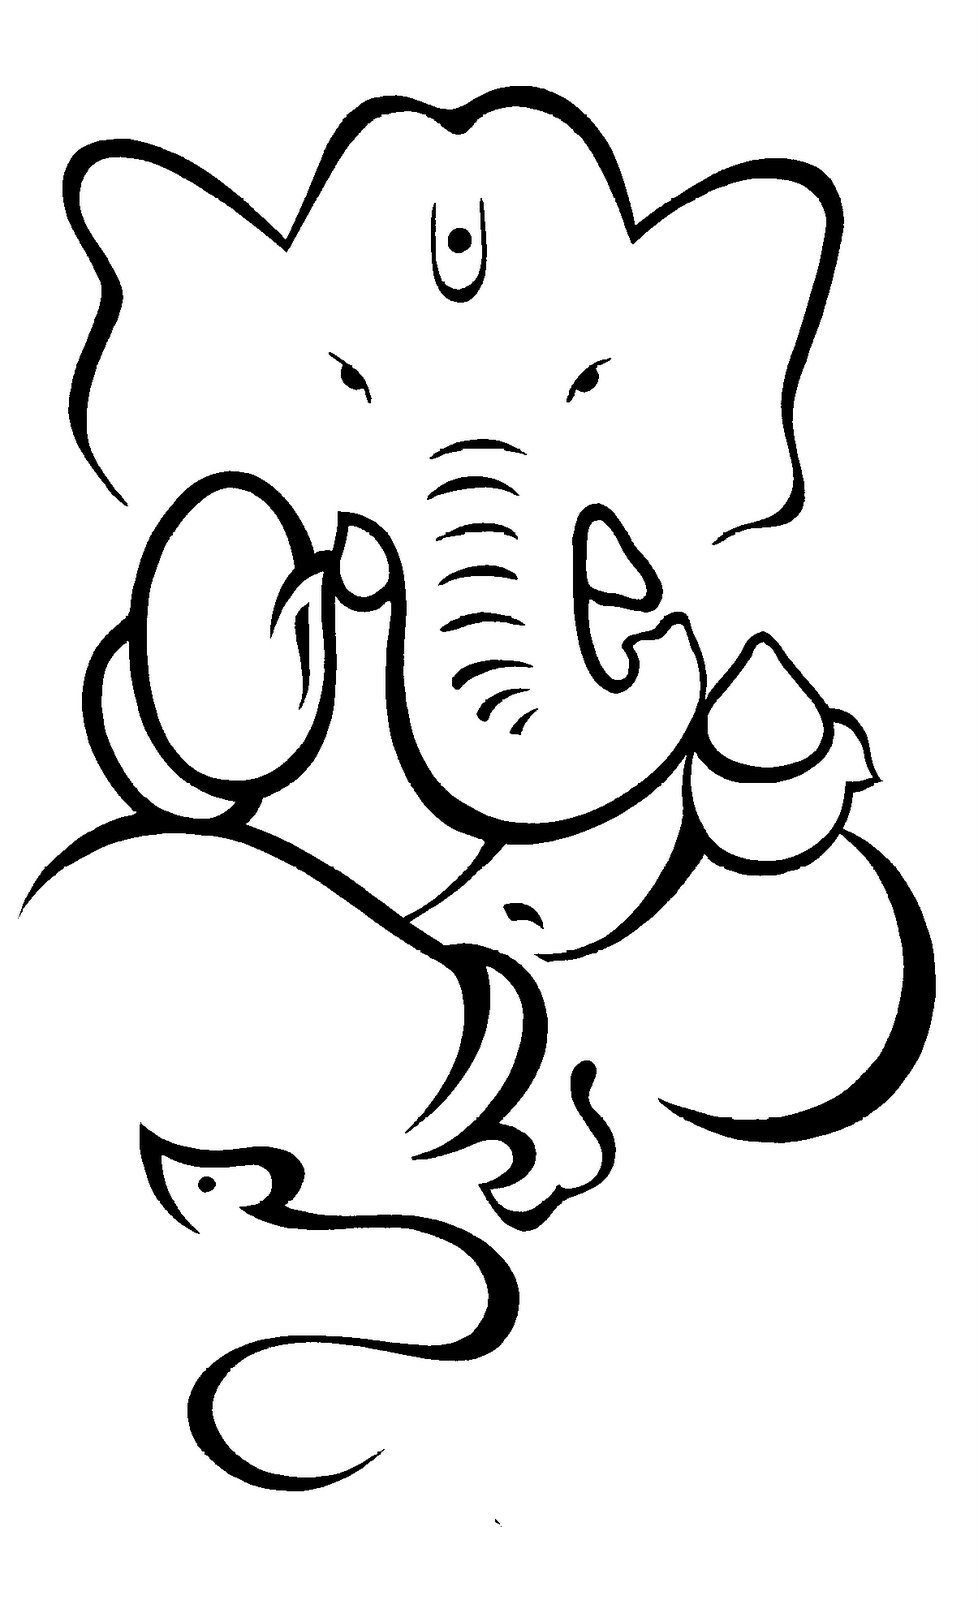 Outline Sketch Of Lord Ganesha at PaintingValley.com | Explore